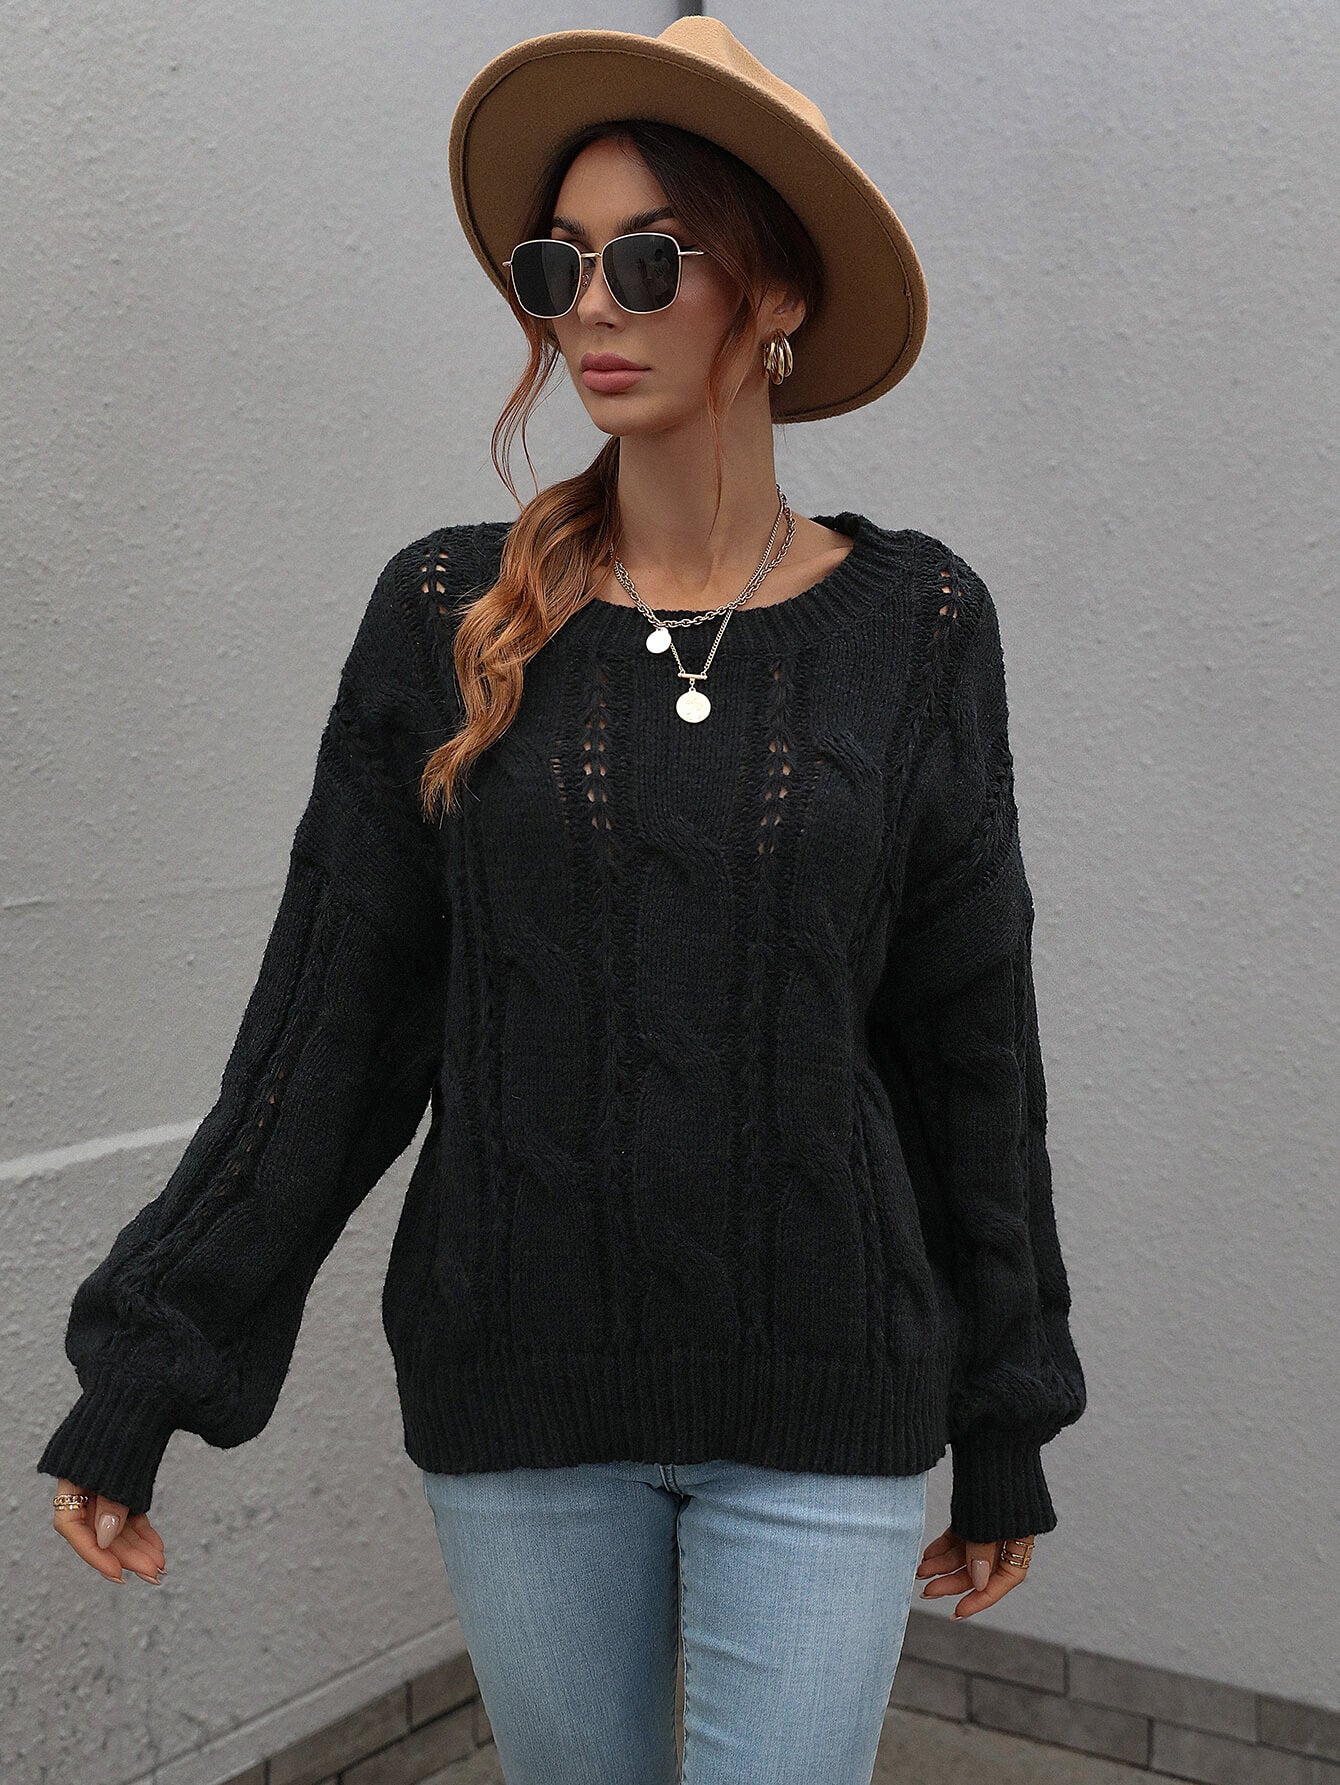 Cable-Knit Openwork Round Neck Sweater - Black / S Girl Code